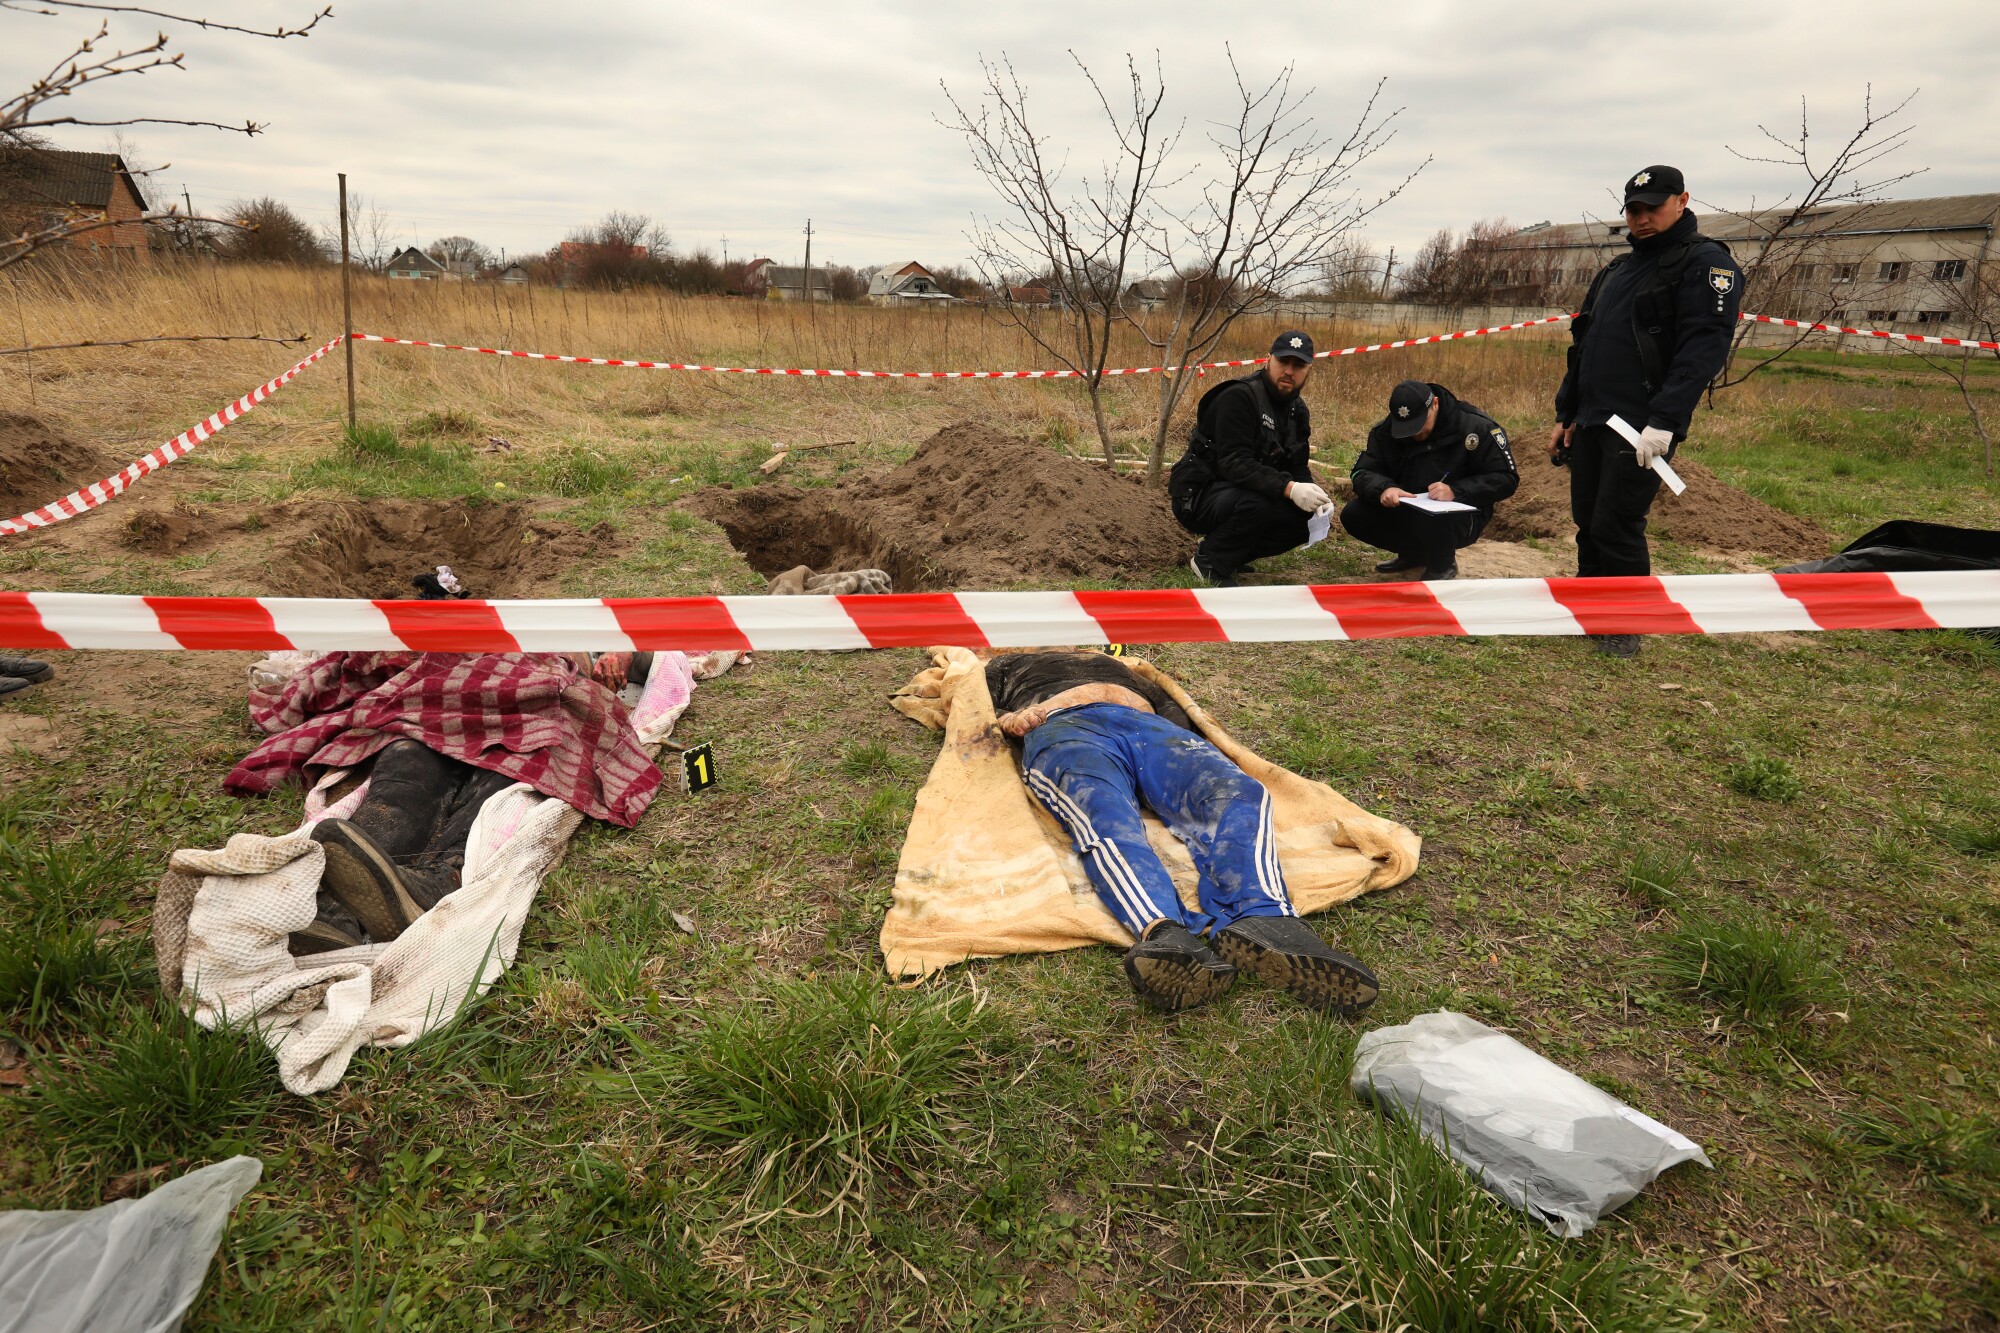 Bodies exhumed from a mass grave lie on the ground as investigators work in the town of Borodyanka, Ukraine.